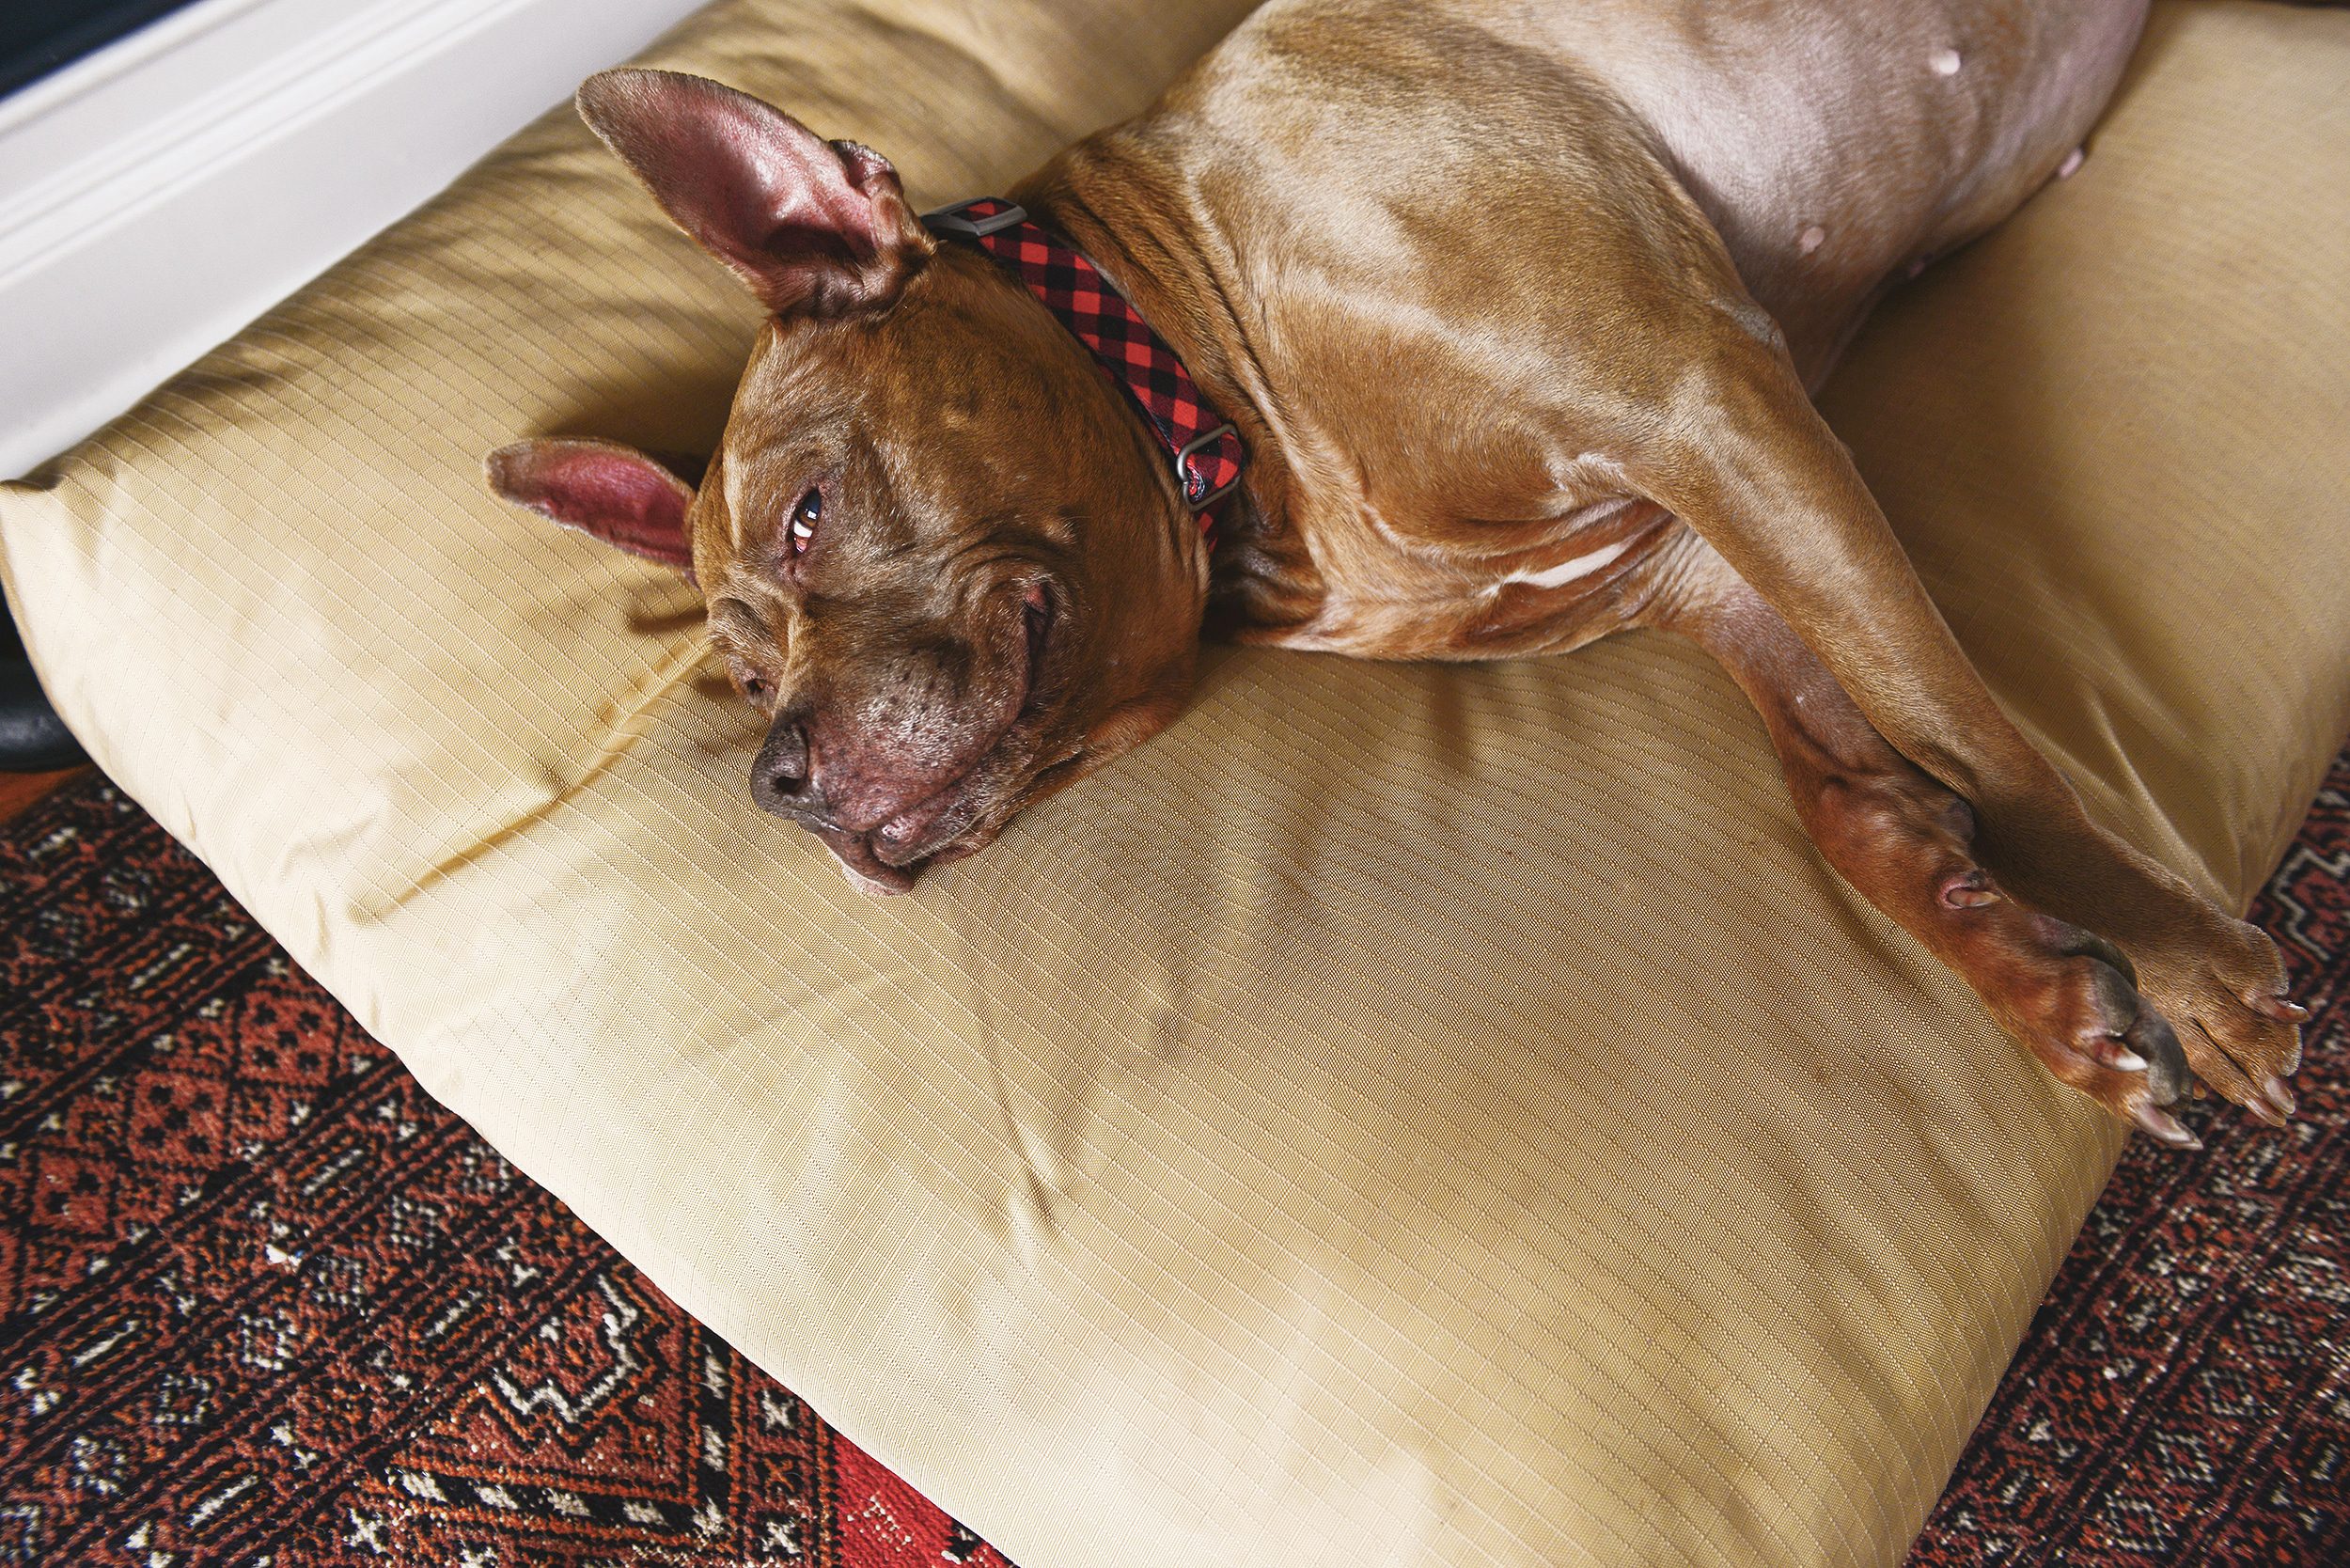 Our happy pit bull, sleeping on her dog bed | via Yellow Brick Home